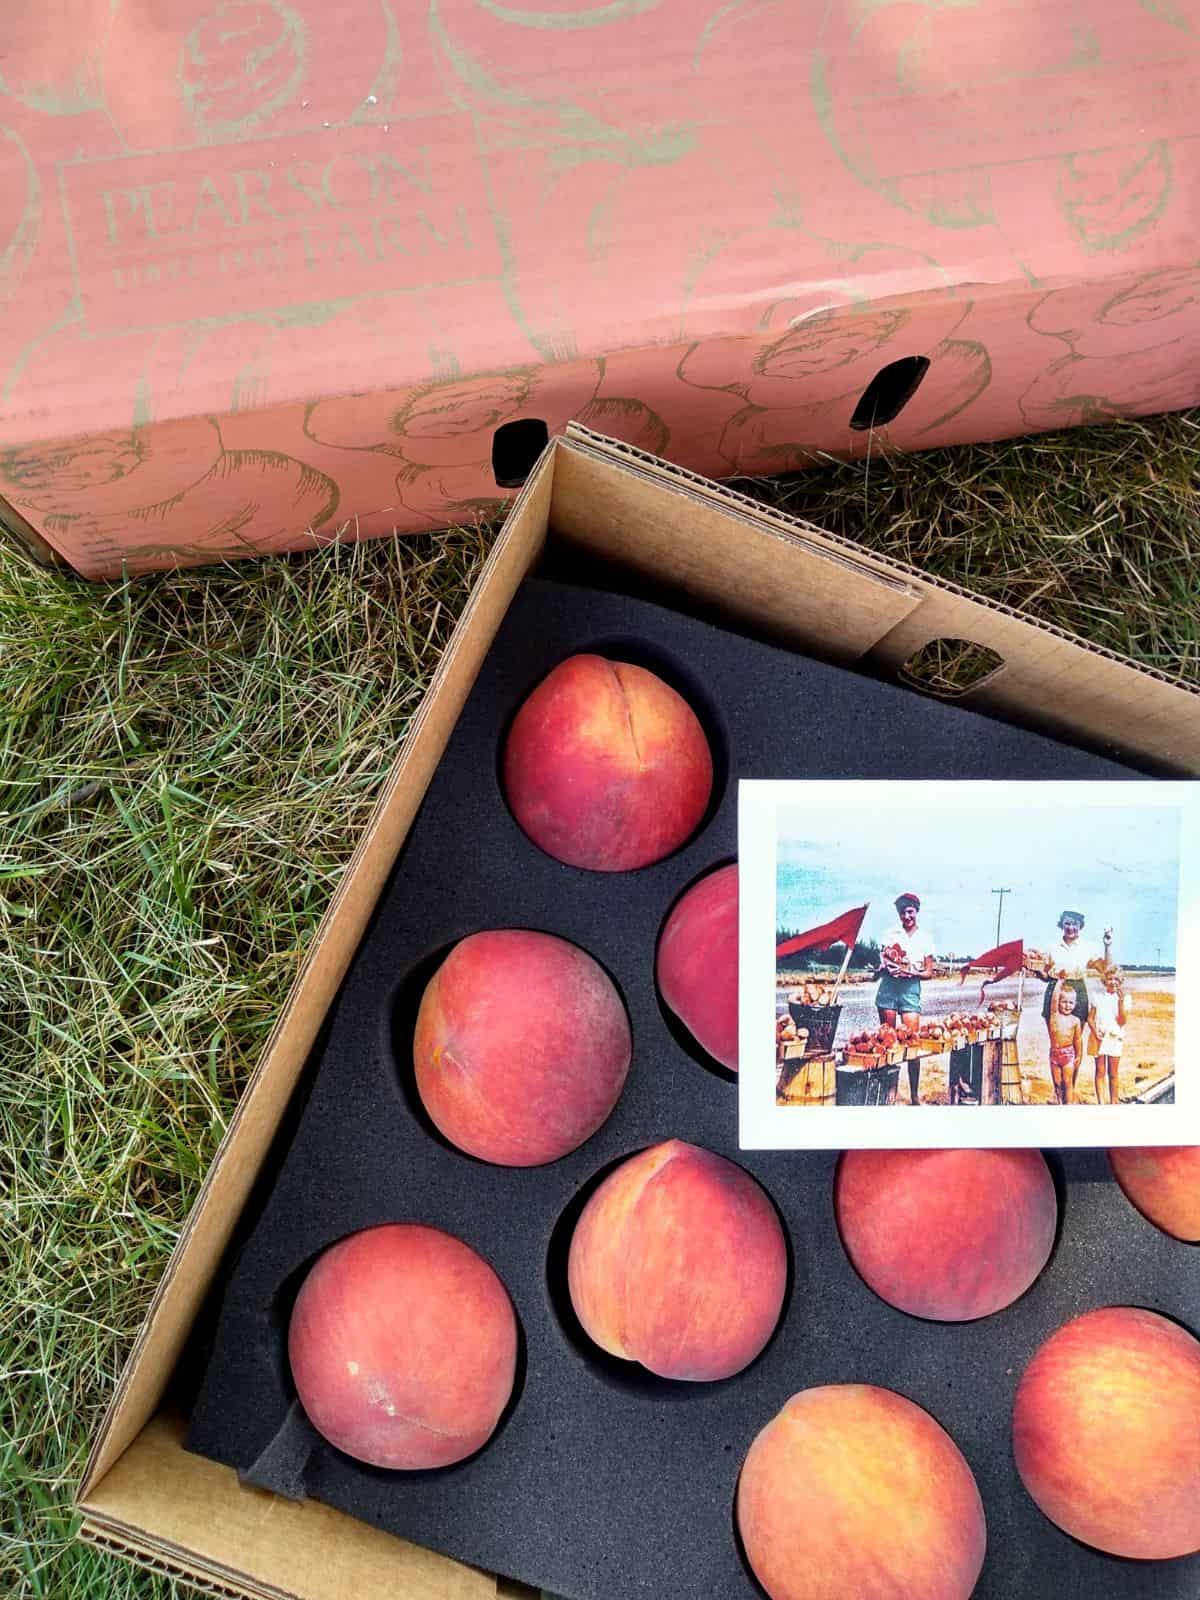 An opened box of peaches sitting on the grass. There is an old photo on top of the peaches.